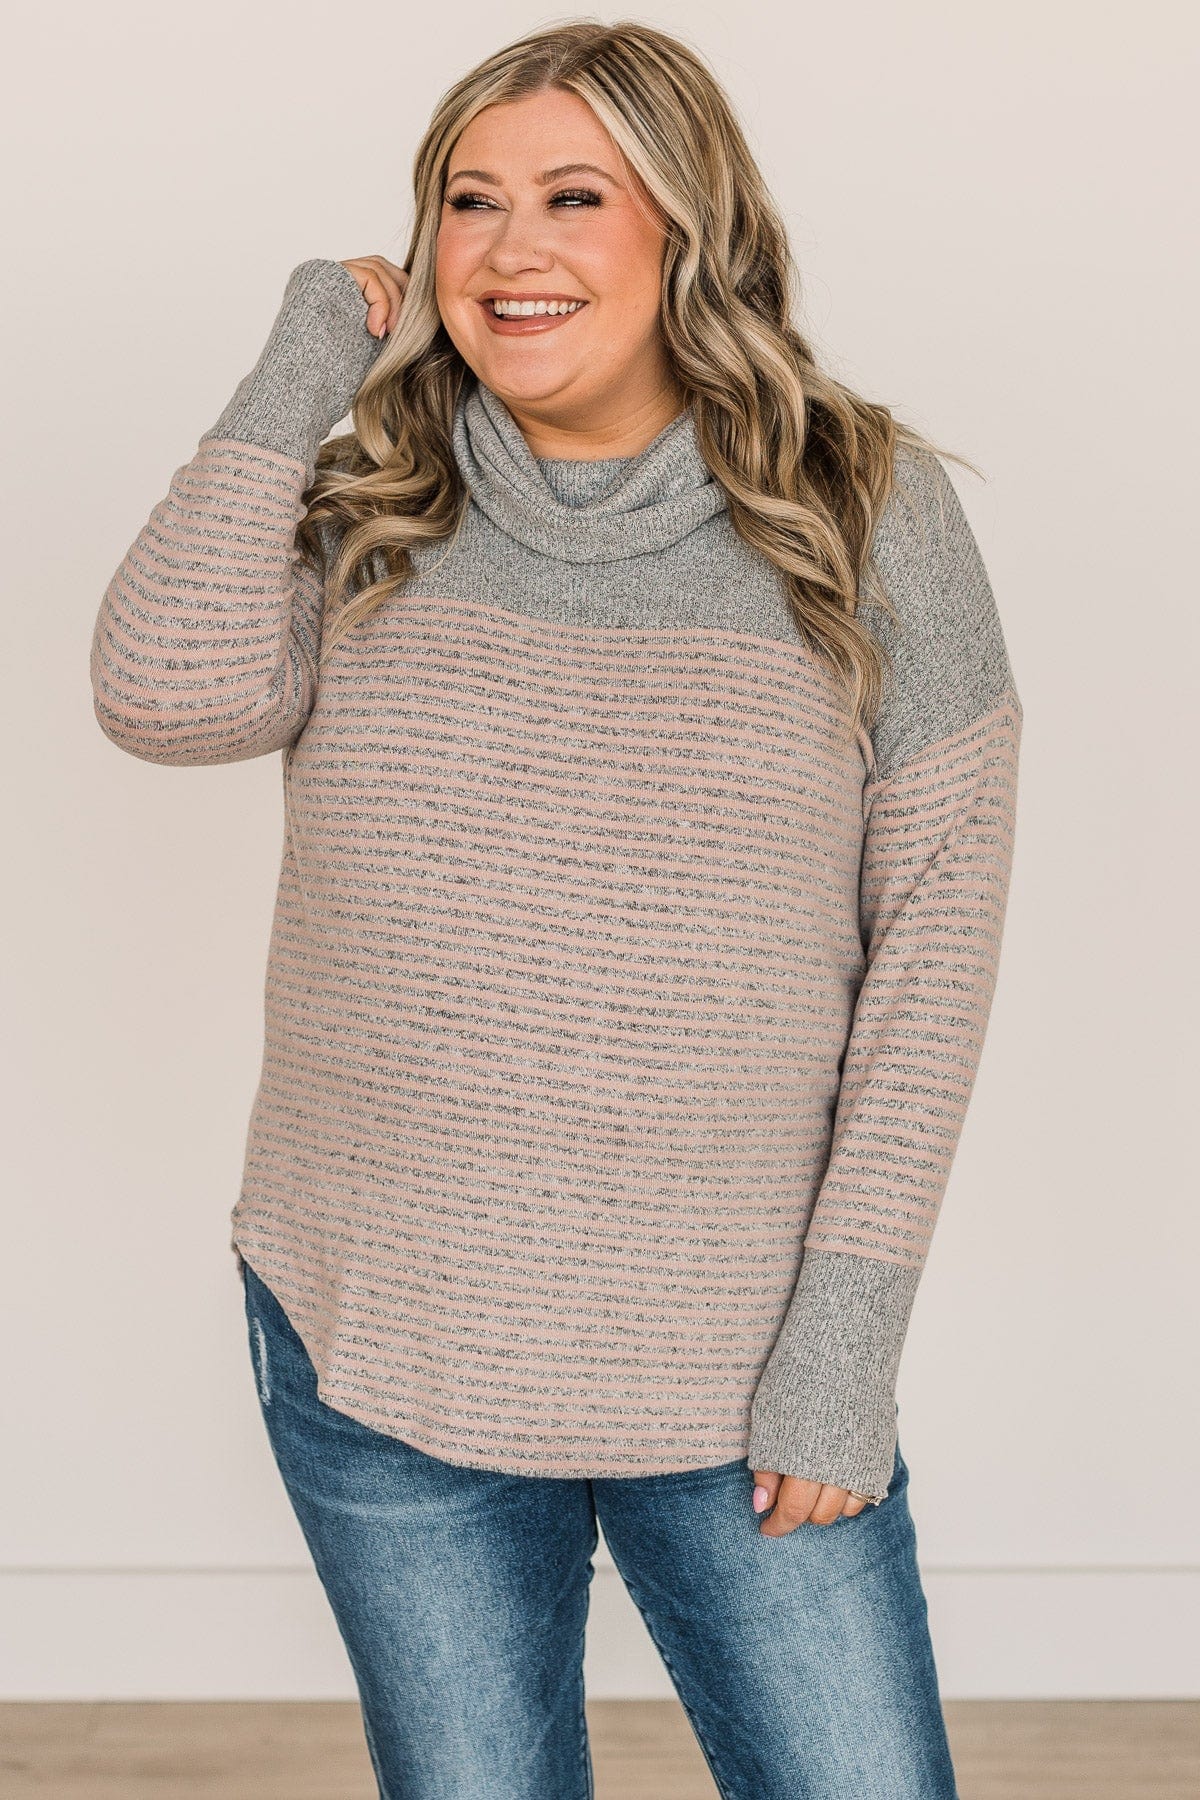 Just Can't Wait Cowl Neck Top- Grey & Dusty Pink